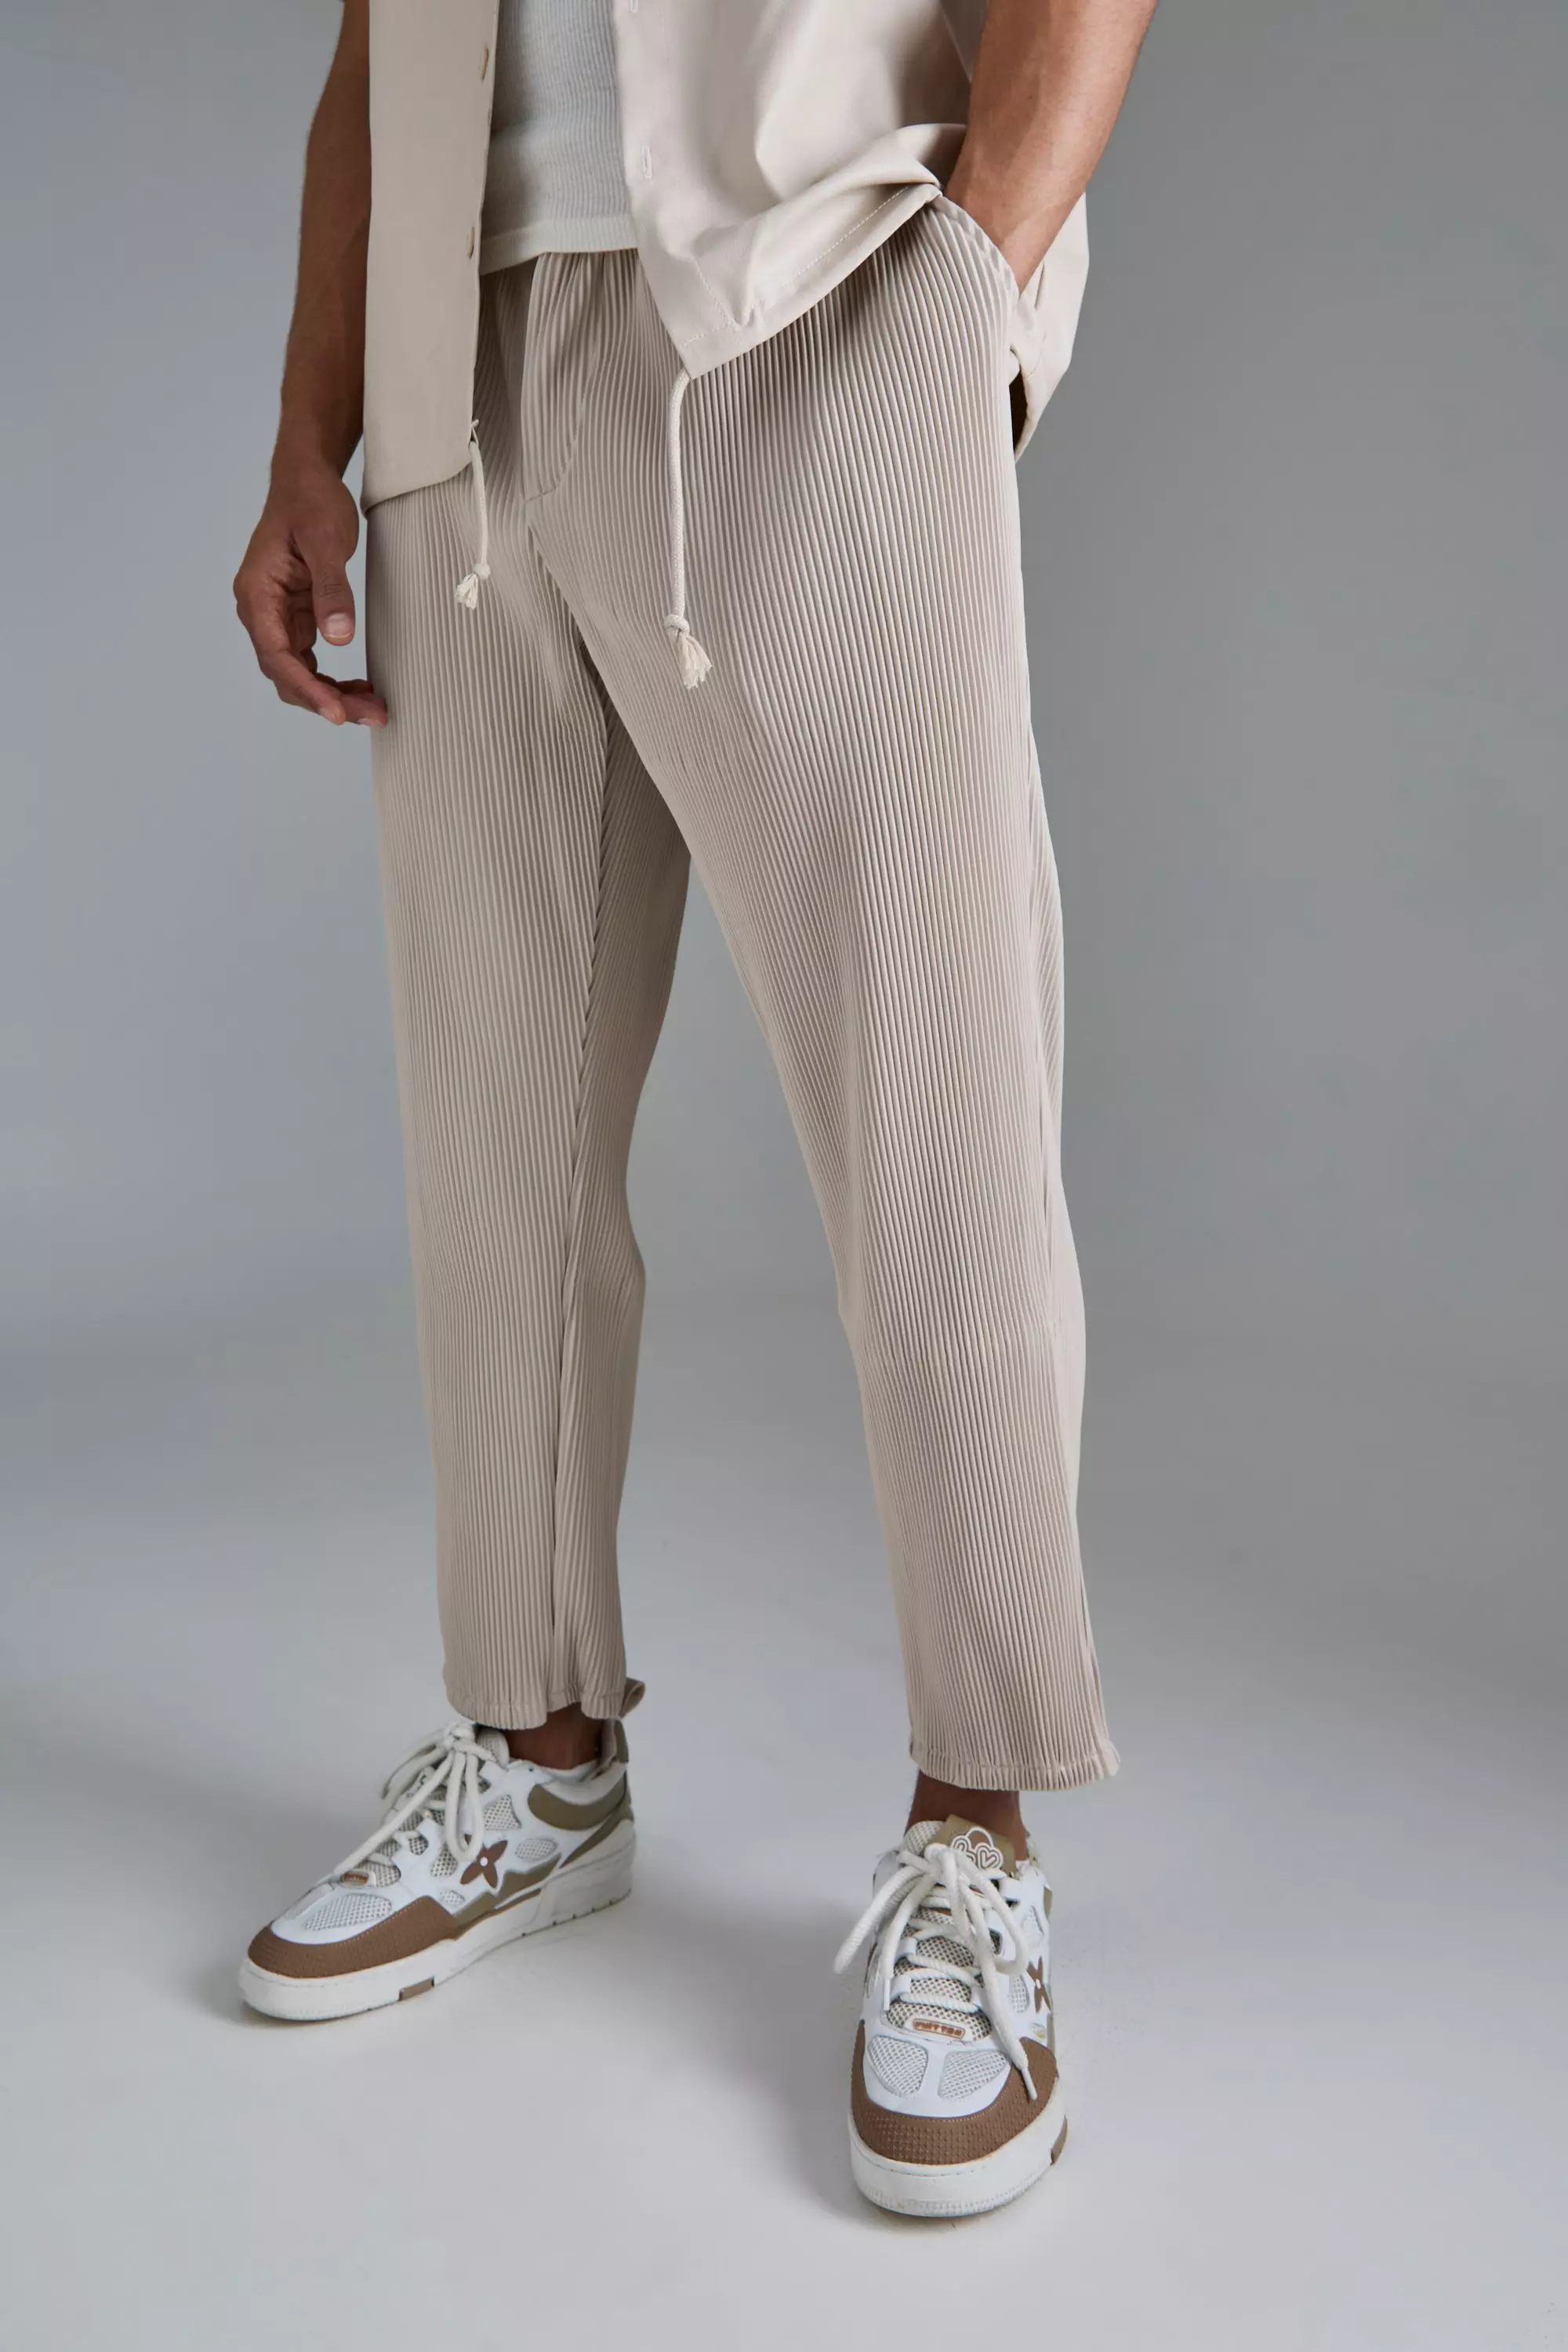 Grey Tapered technical-pleated trousers